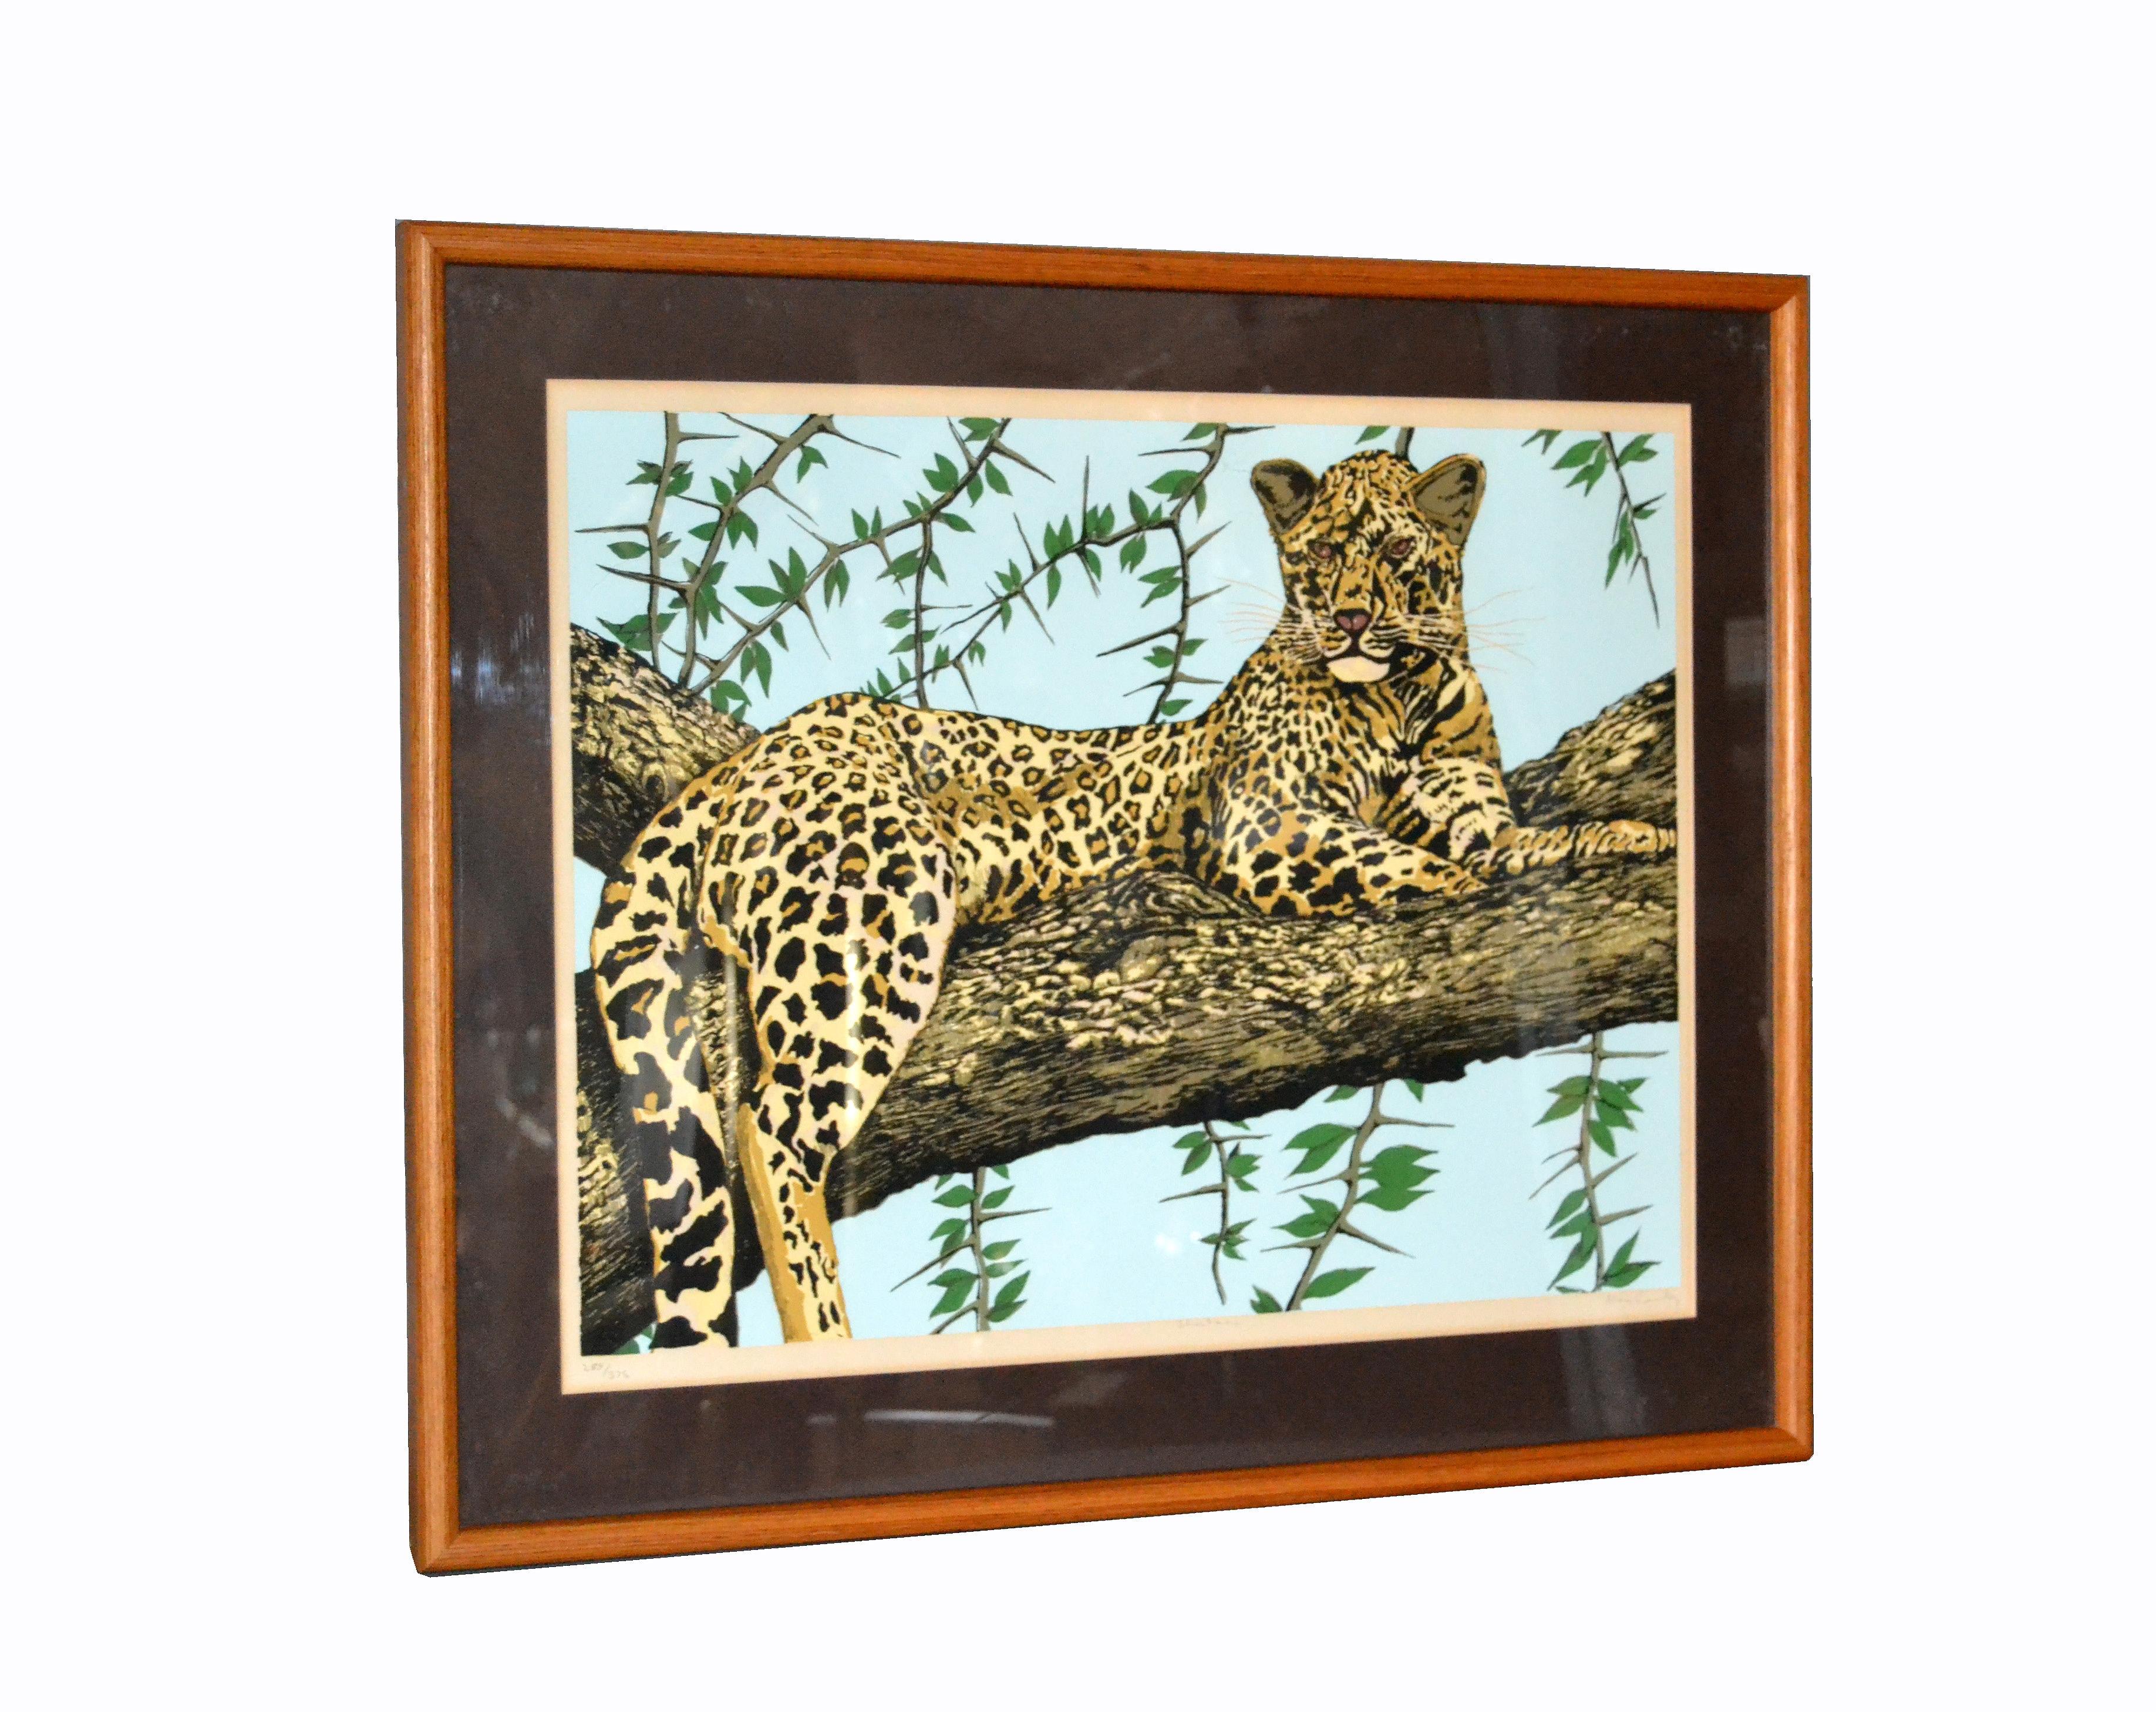 Original Lithograph Cheetah Signed by Artist Mac Couley For Sale 2